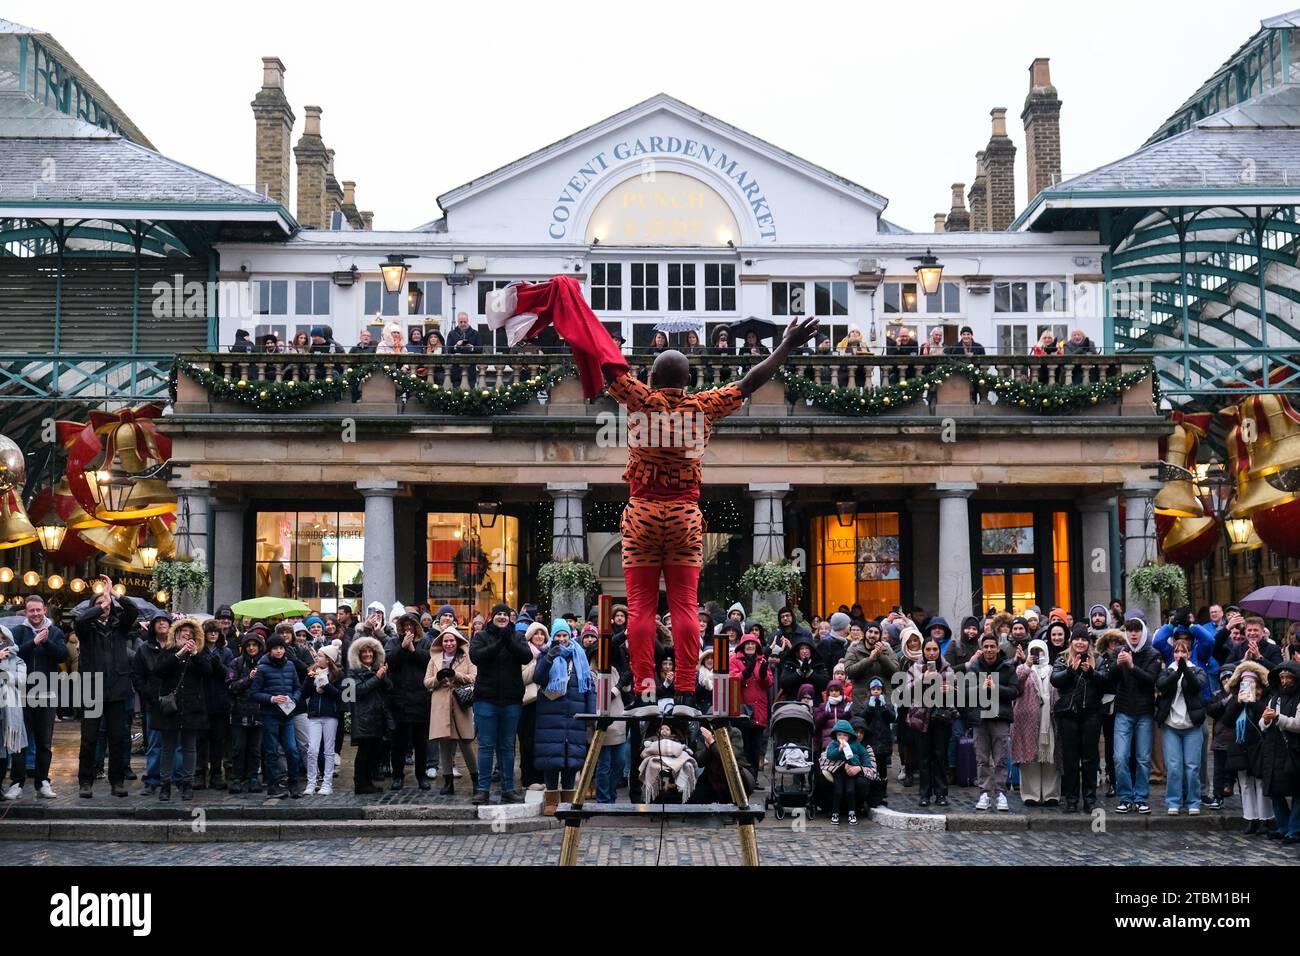 London, UK. A Covent Garden street performer entertains the crowd. The performers are part of a tradition dating back centuries. Stock Photo